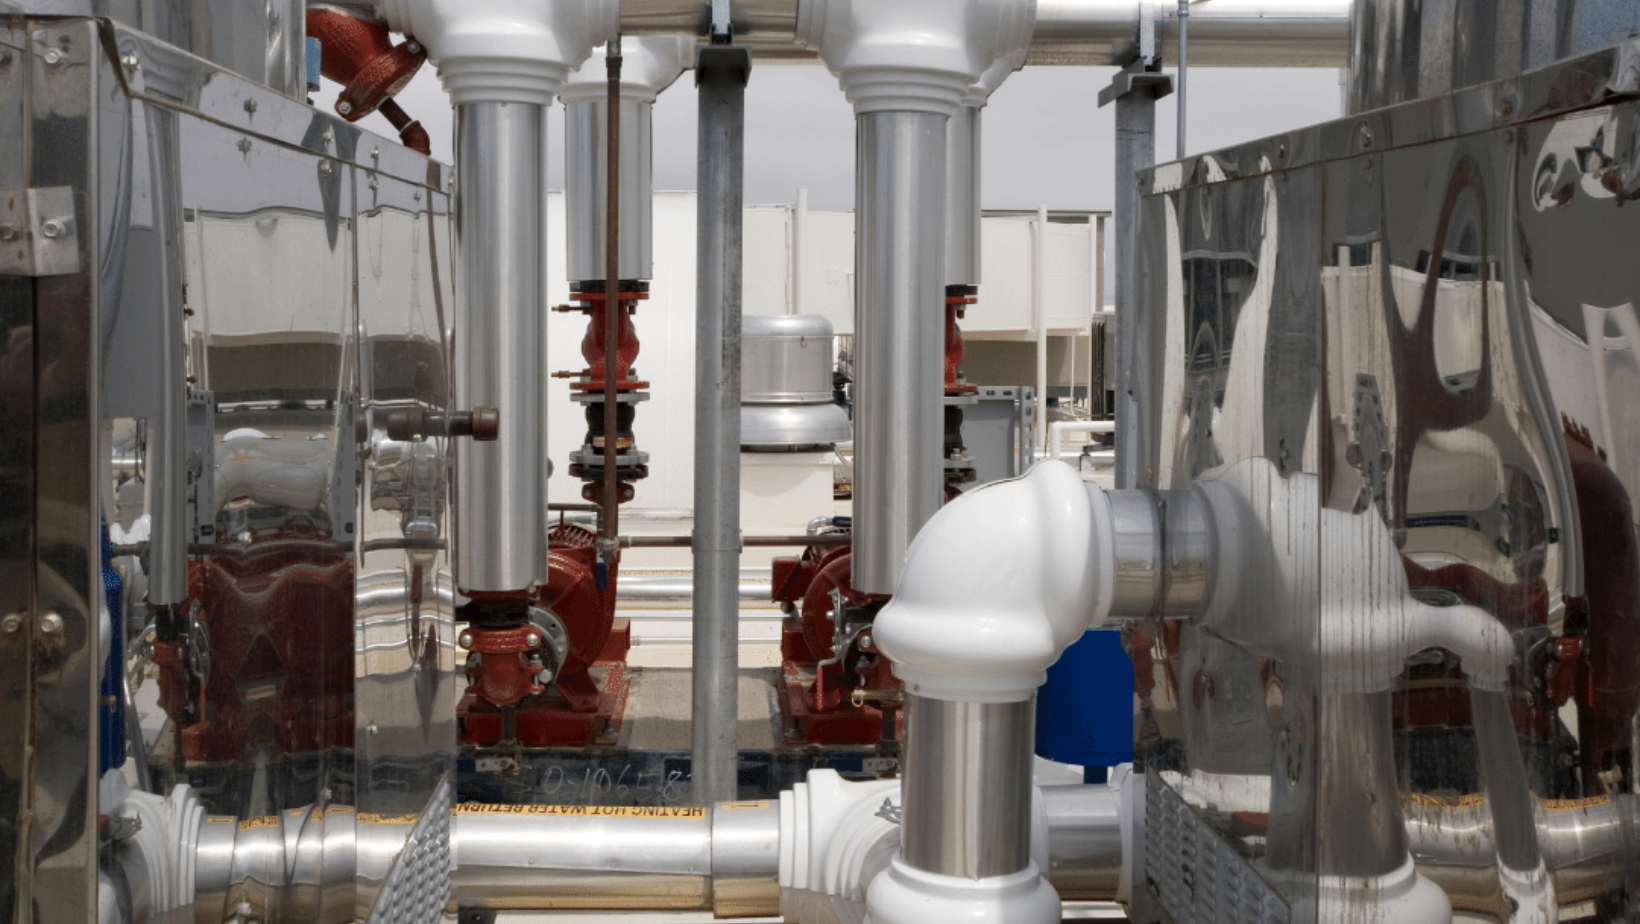 Disadvantages of cogeneration in HVAC systems